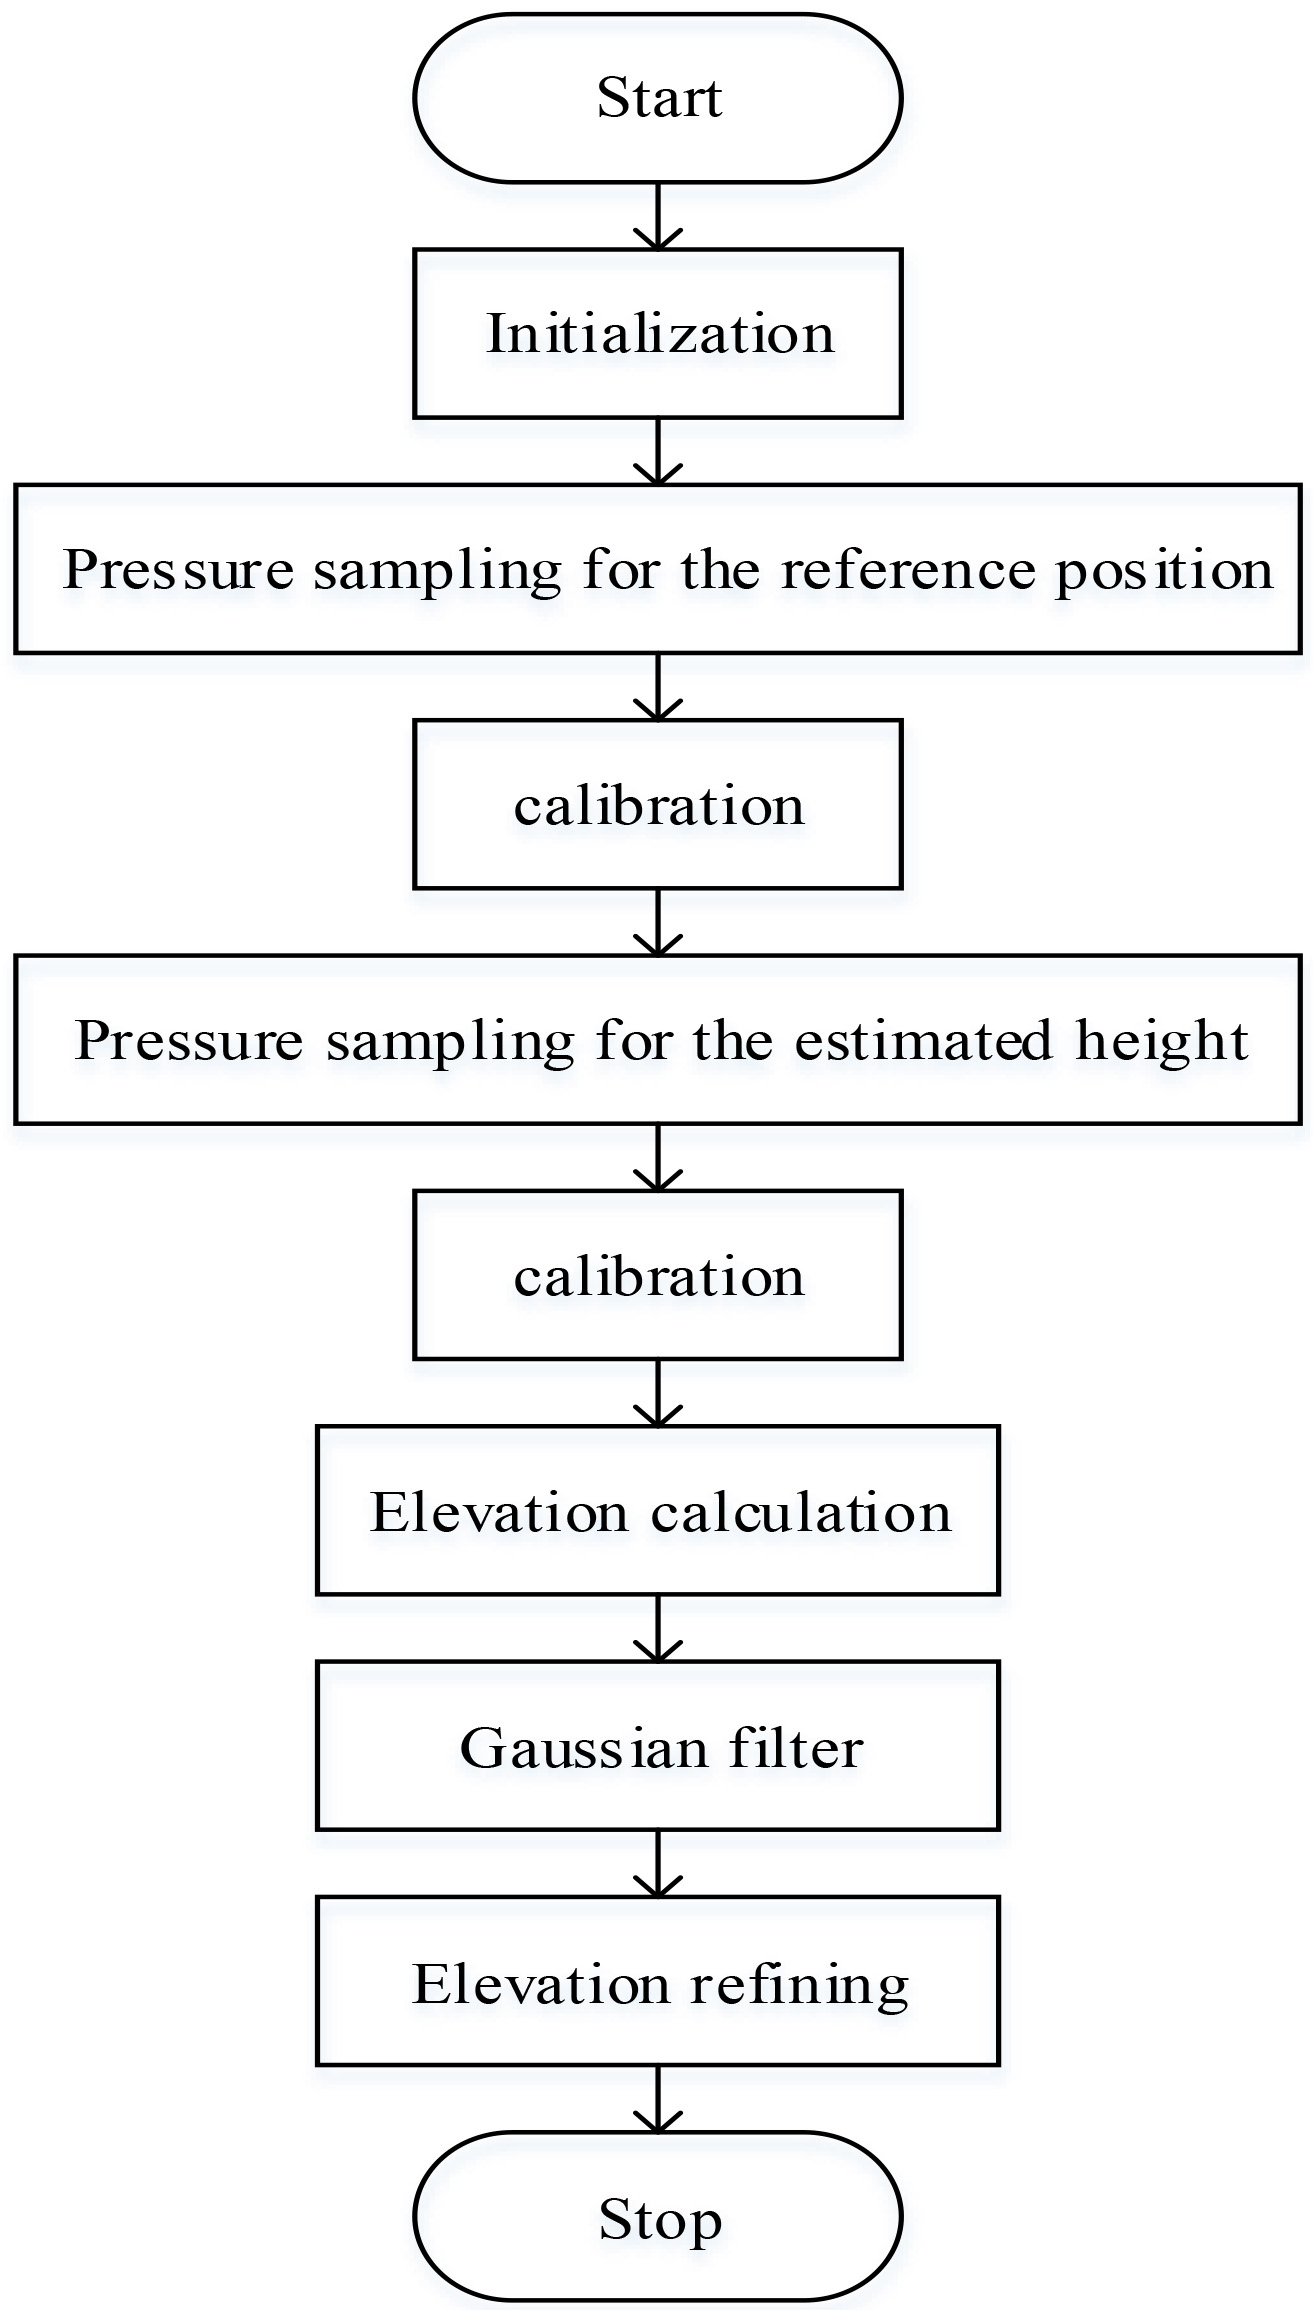 Flow diagram of the differential barometric altimetry system.